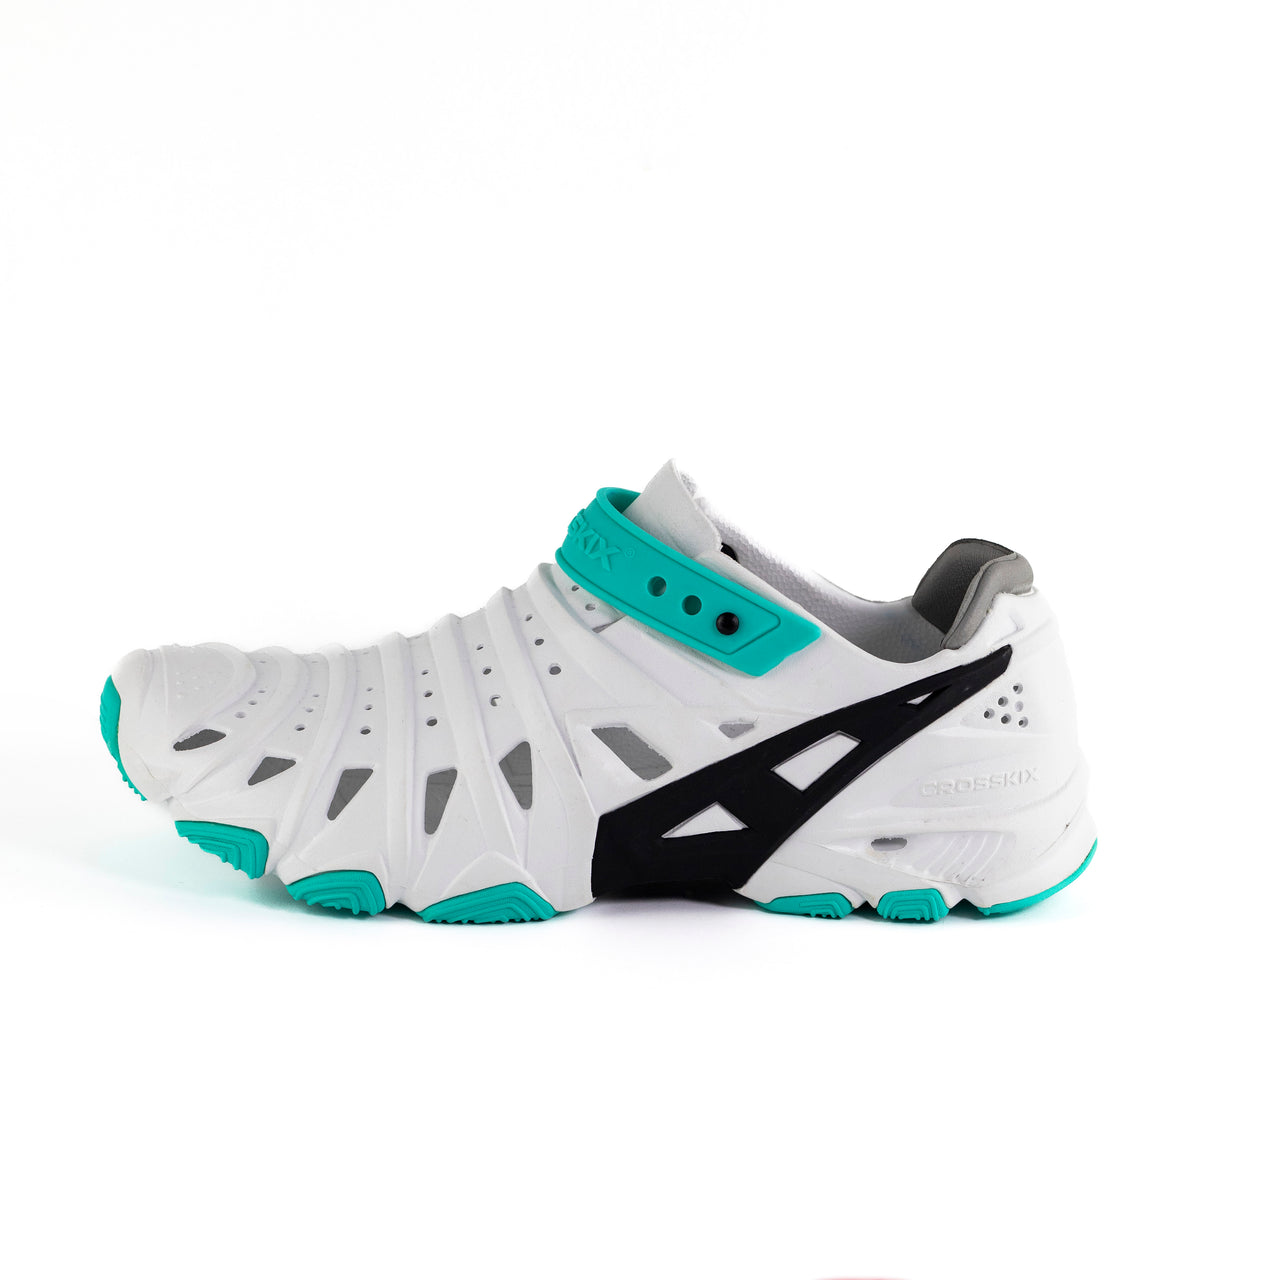 2.0 Closed Toe Water Shoes for Men